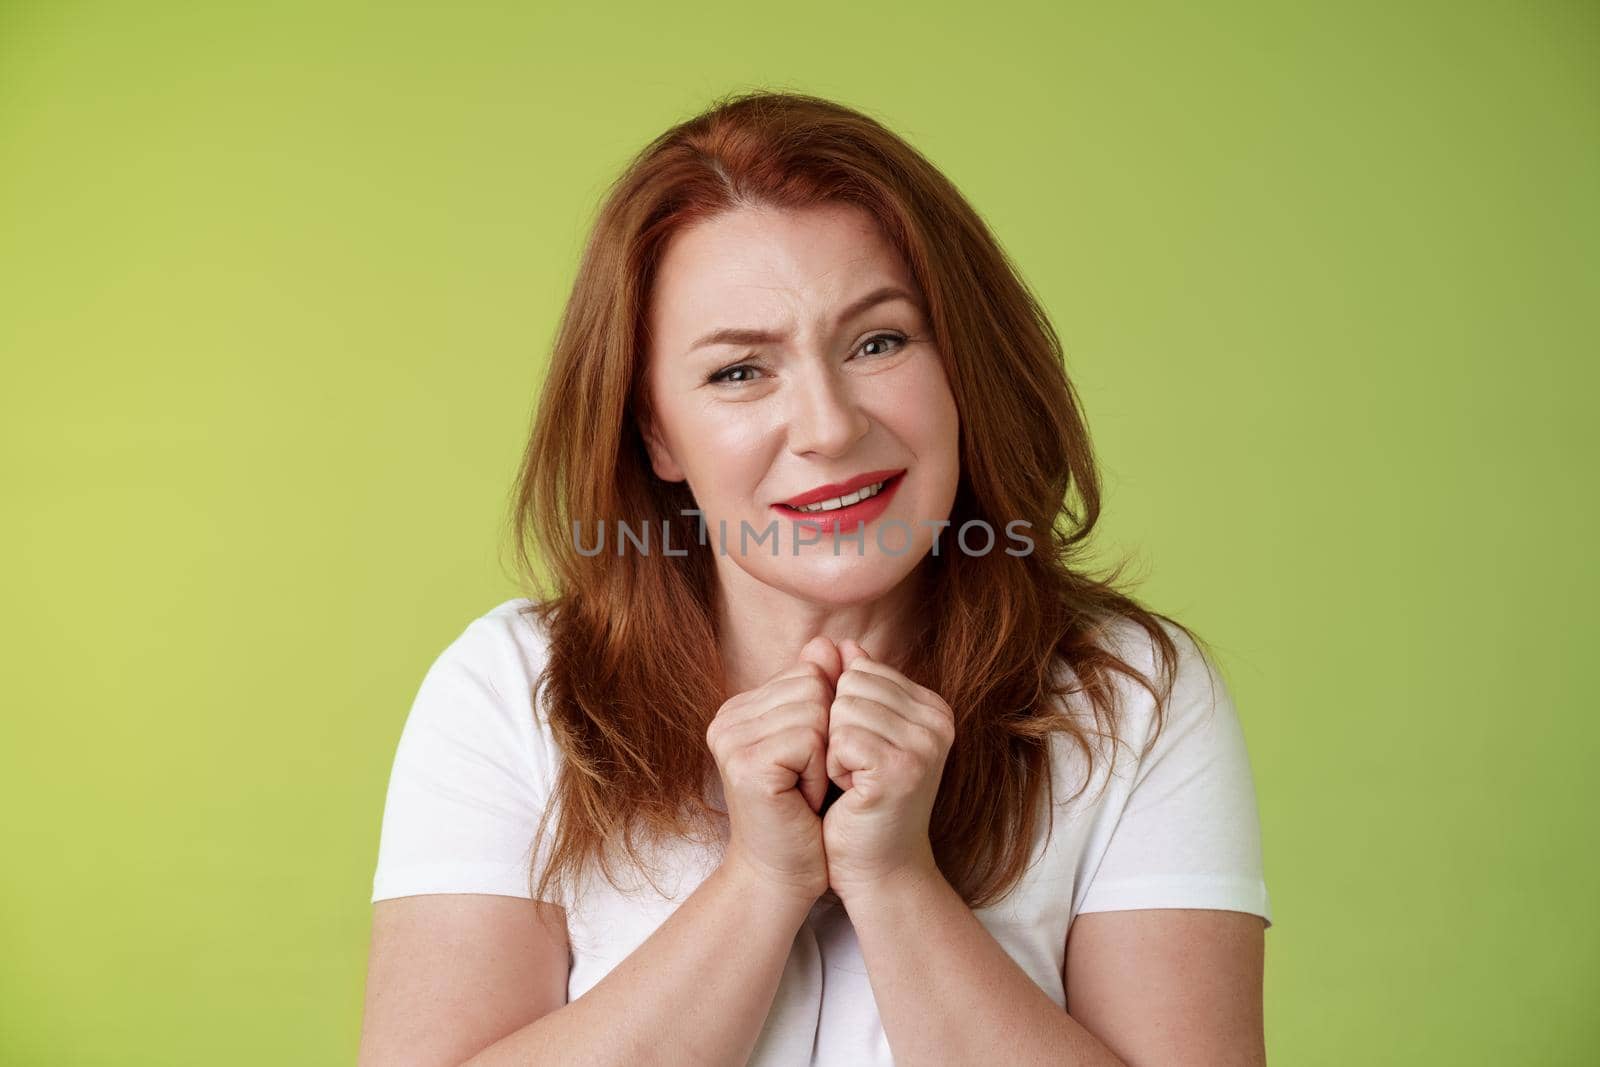 Silly touched tender redhead charmed middle-aged woman sighing gladly gaze admiration delighted press hands together heartwarmed fascinated look grateful lovely camera green background.